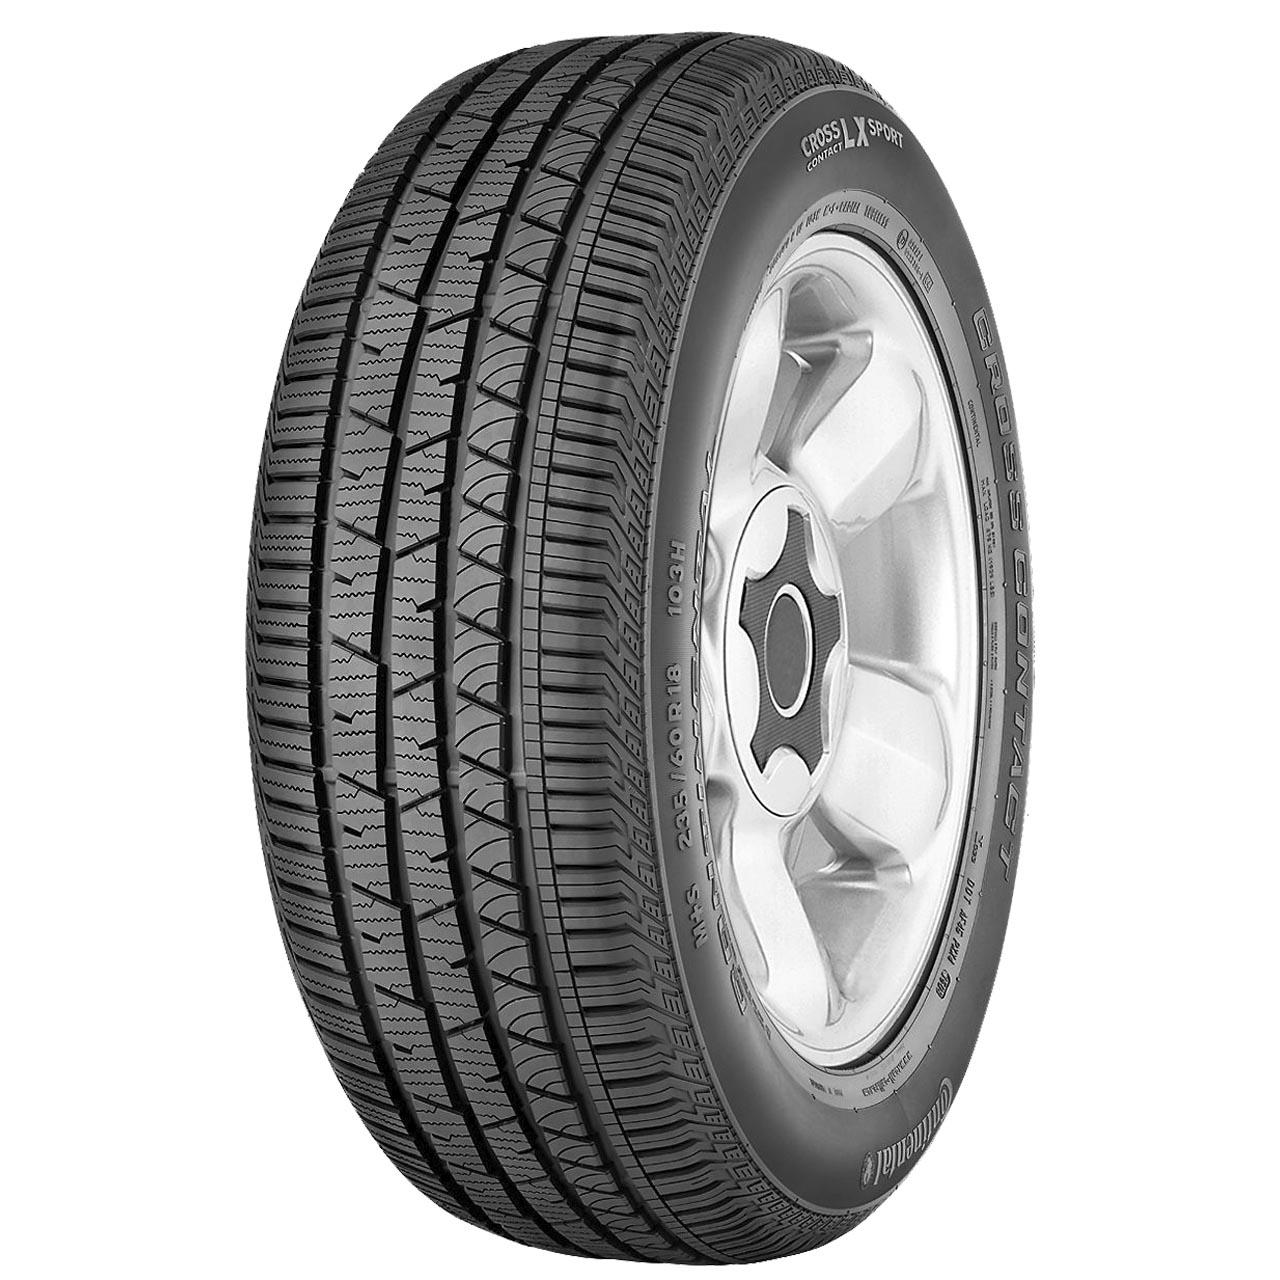 CONTINENTAL CROSSCONTACT LX SPORT FOR SIL 245/45 R20 99V  TL M+S